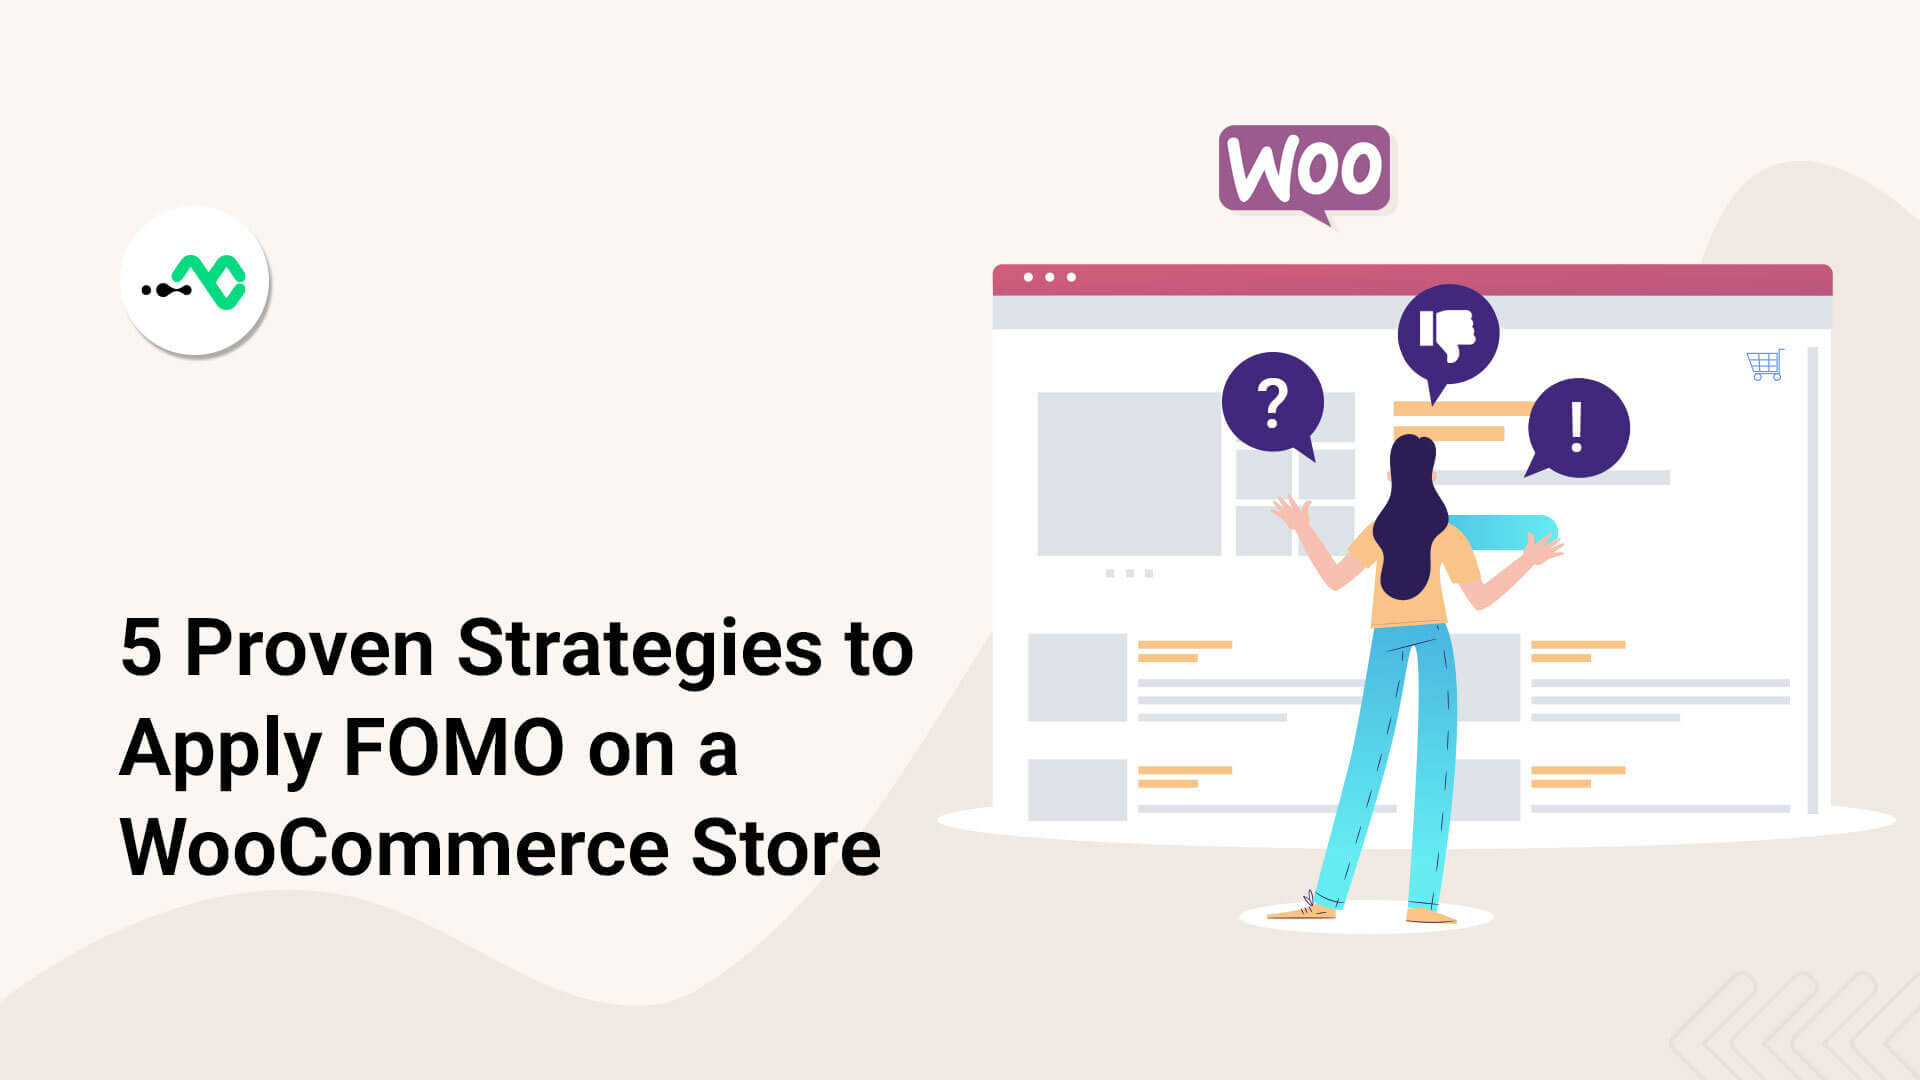 5 Proven Strategies to Apply FOMO on a WooCommerce Store